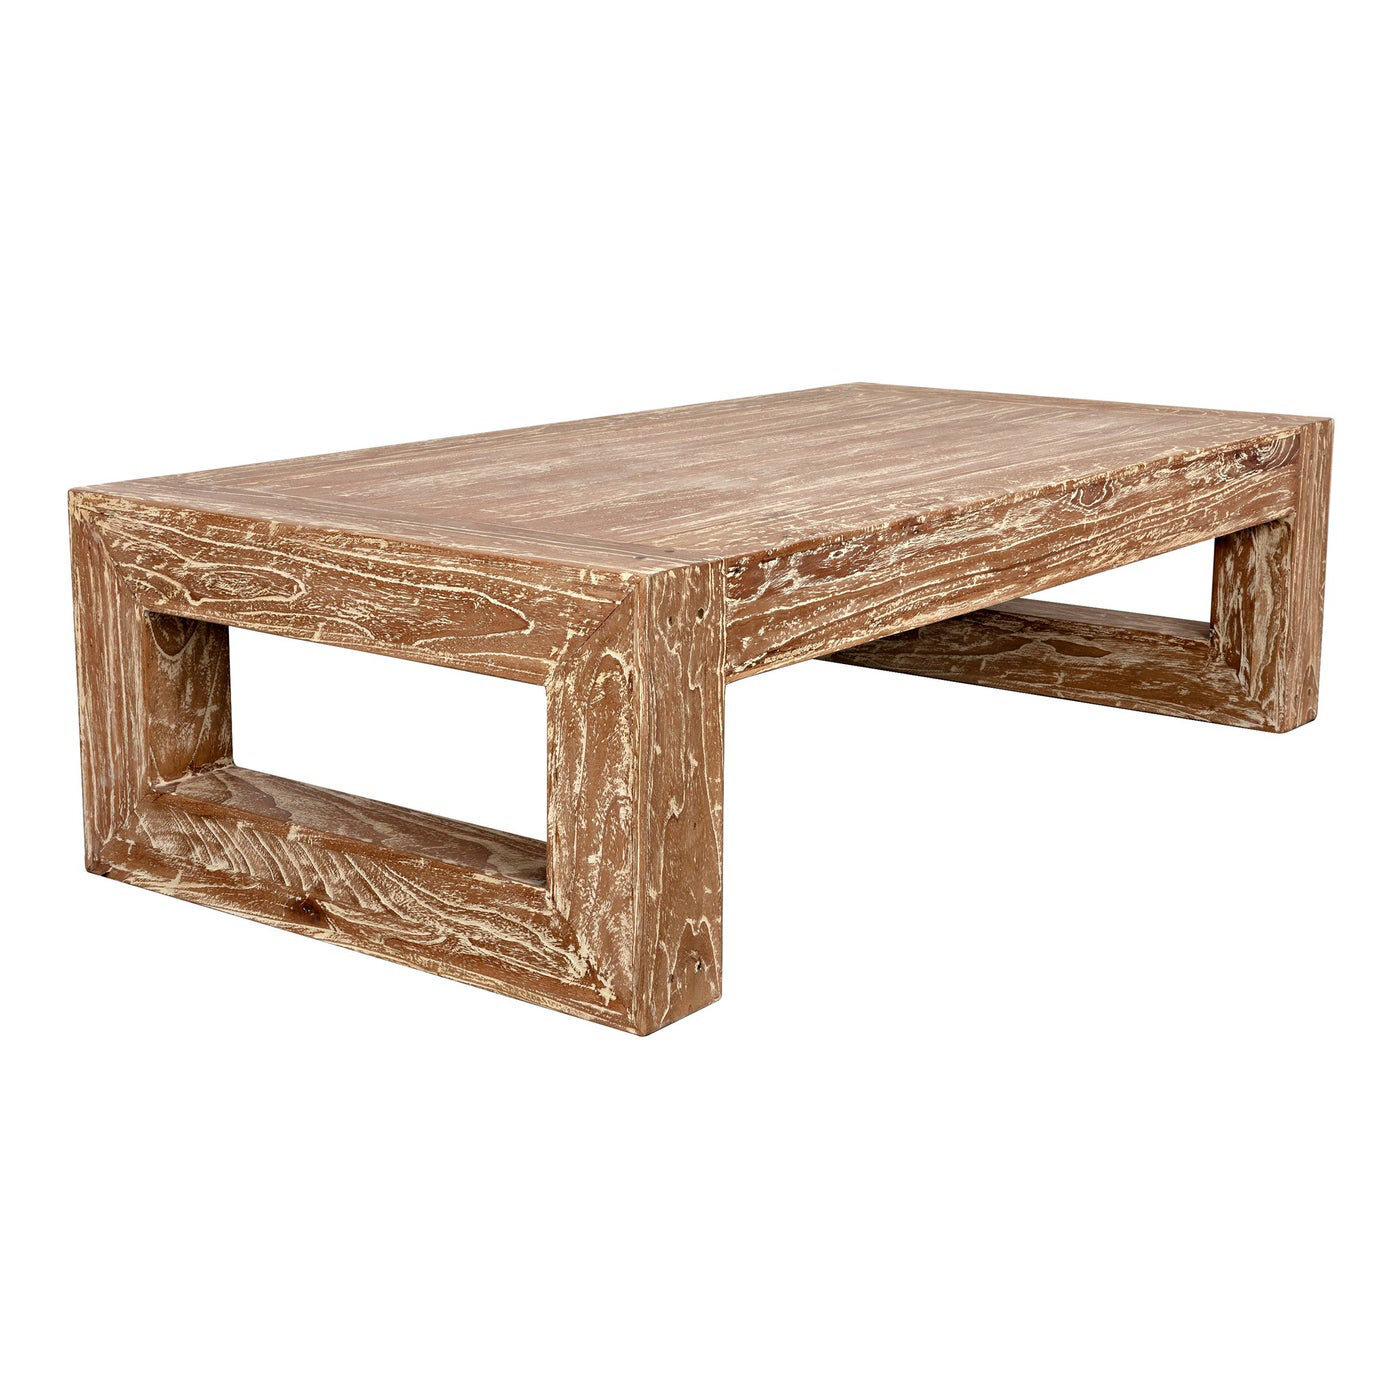 White Washed Cedar Coffee Table